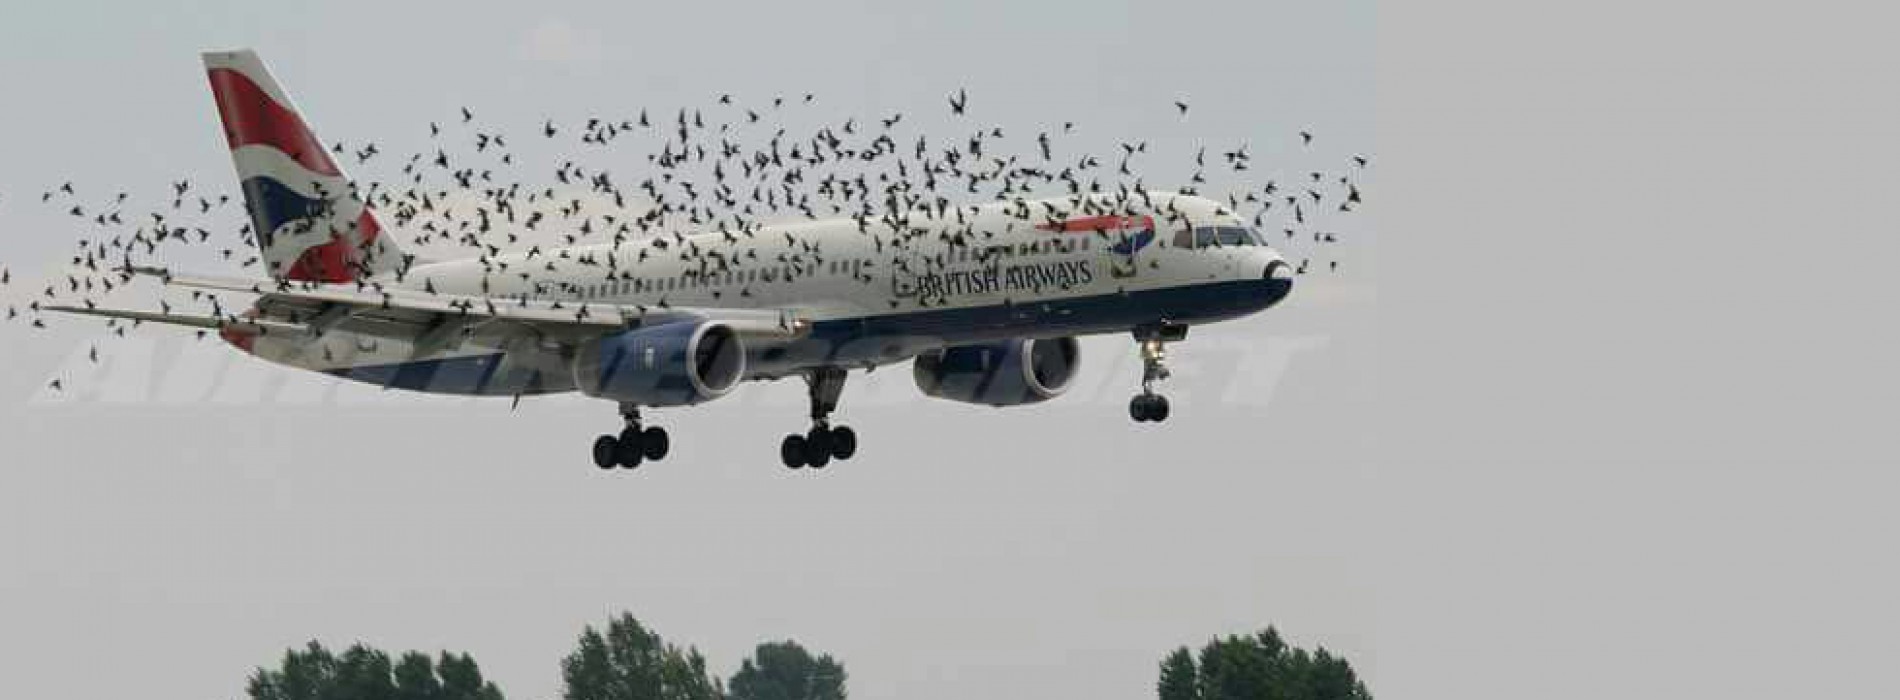 British Airways planes carrying Christians attacked by strange birds in air